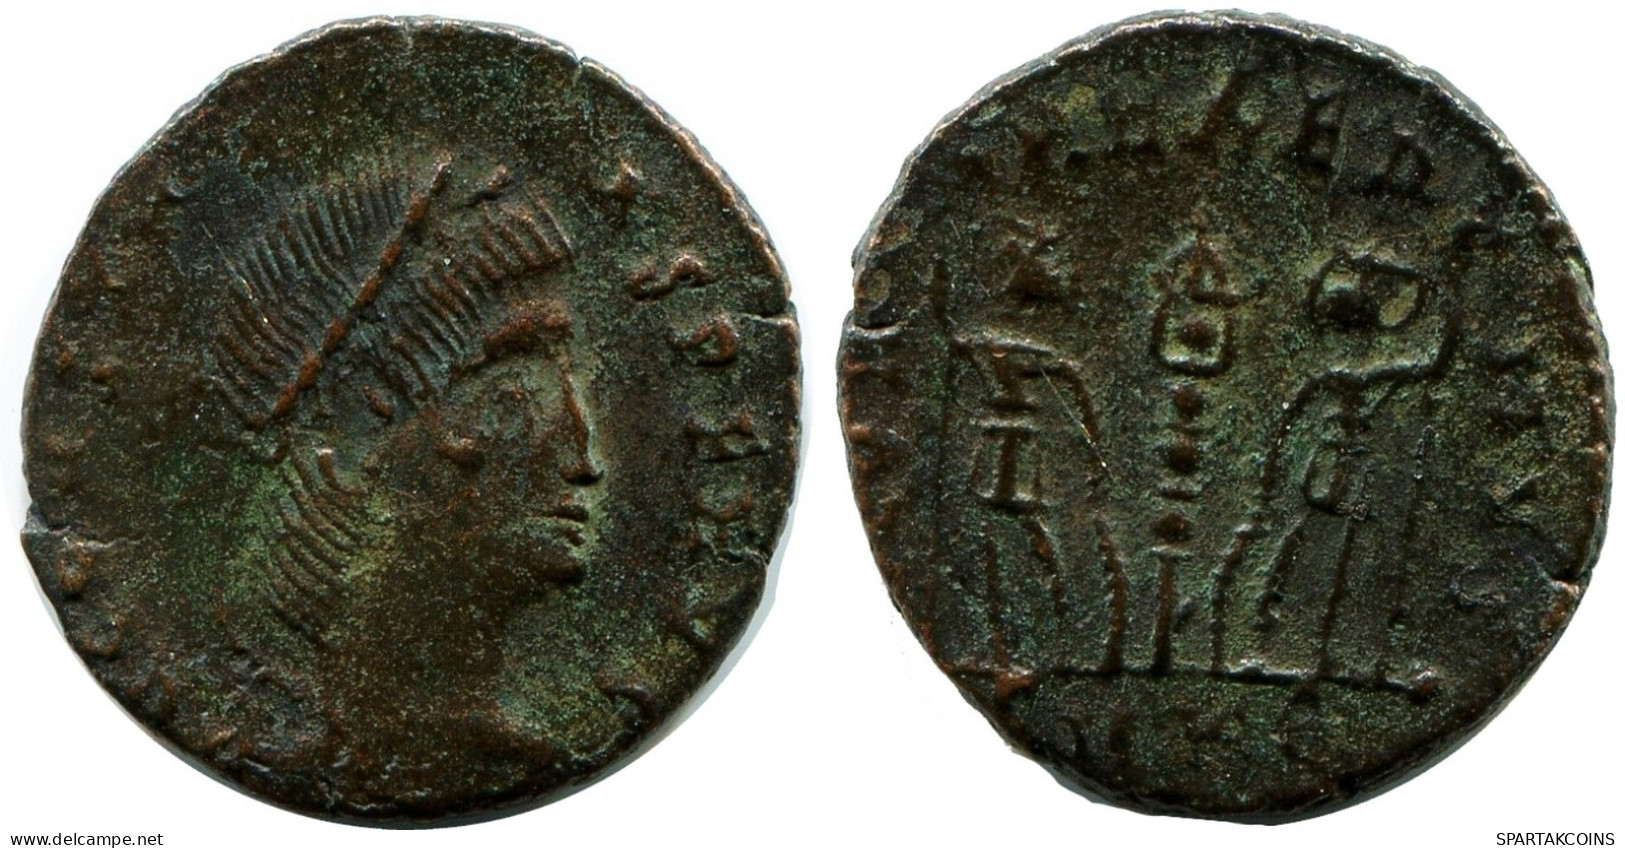 CONSTANS MINTED IN CYZICUS FOUND IN IHNASYAH HOARD EGYPT #ANC11674.14.F.A - El Imperio Christiano (307 / 363)